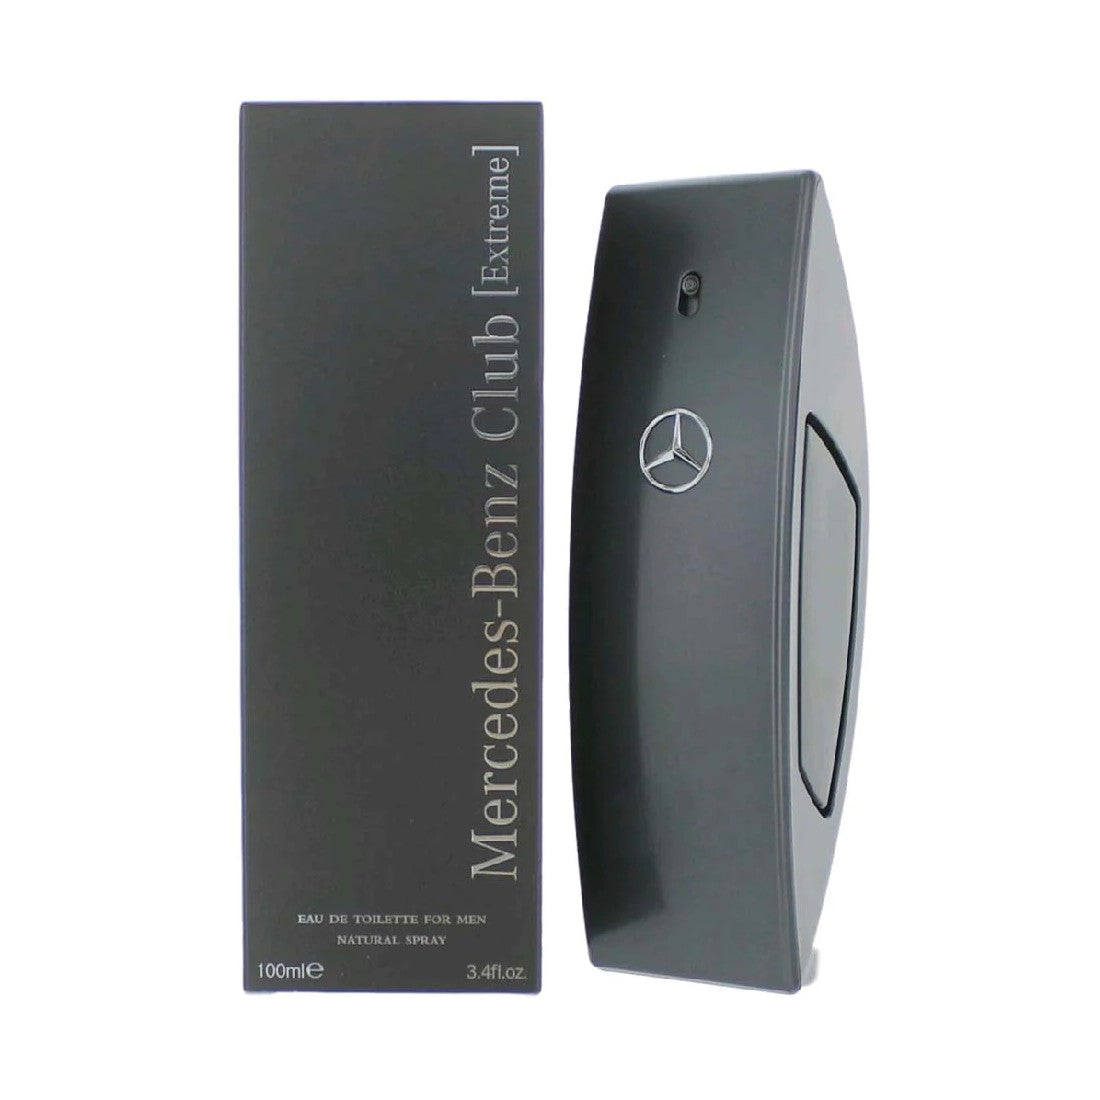 Club Fresh by Mercedes-Benz » Reviews & Perfume Facts